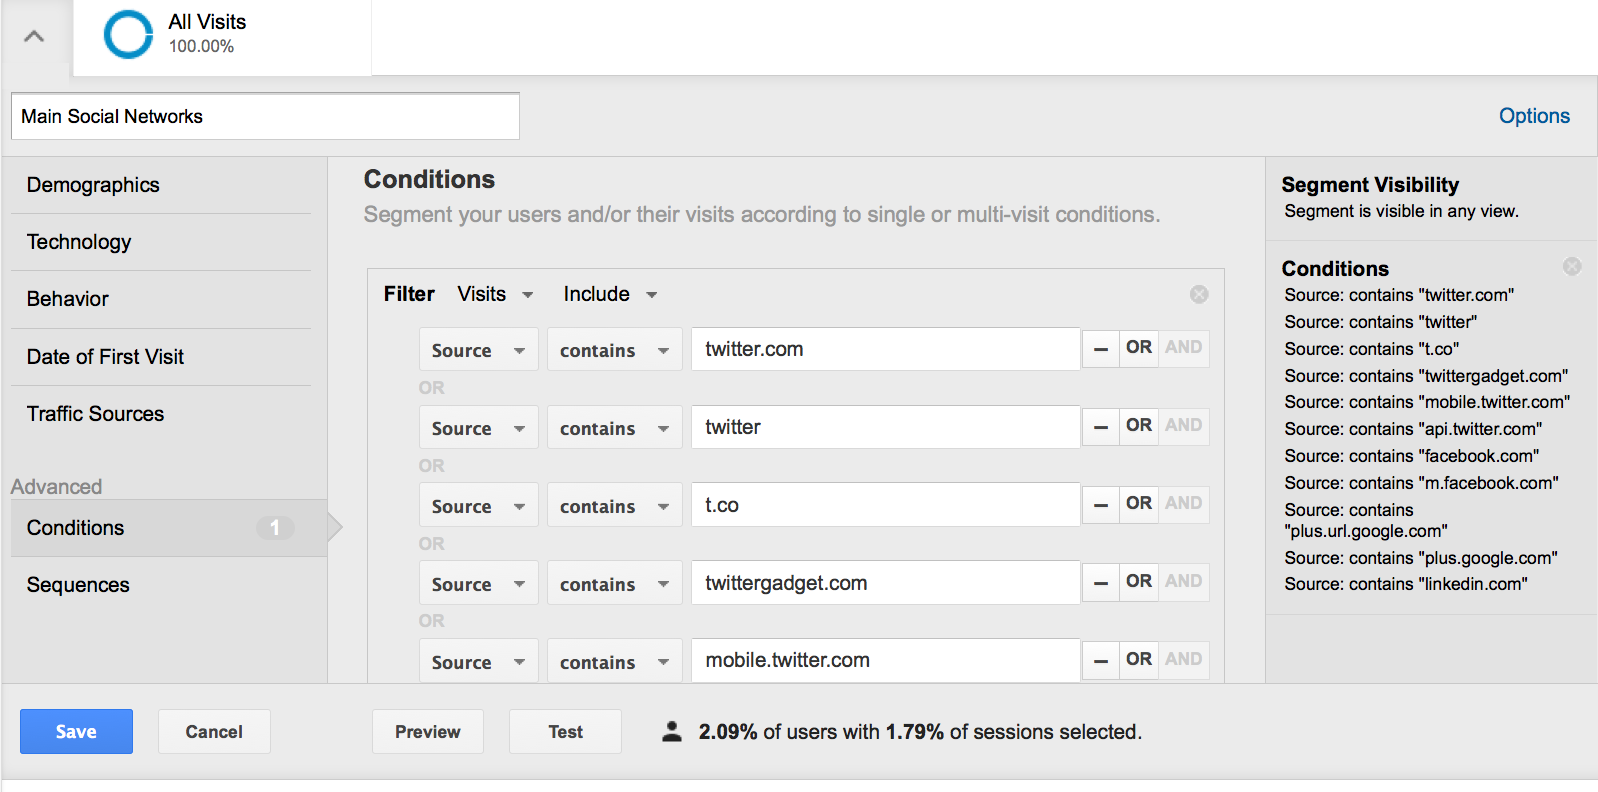 To create a custom advanced segment, begin by clicking the All Visits circle. Then click + Create New Segment.